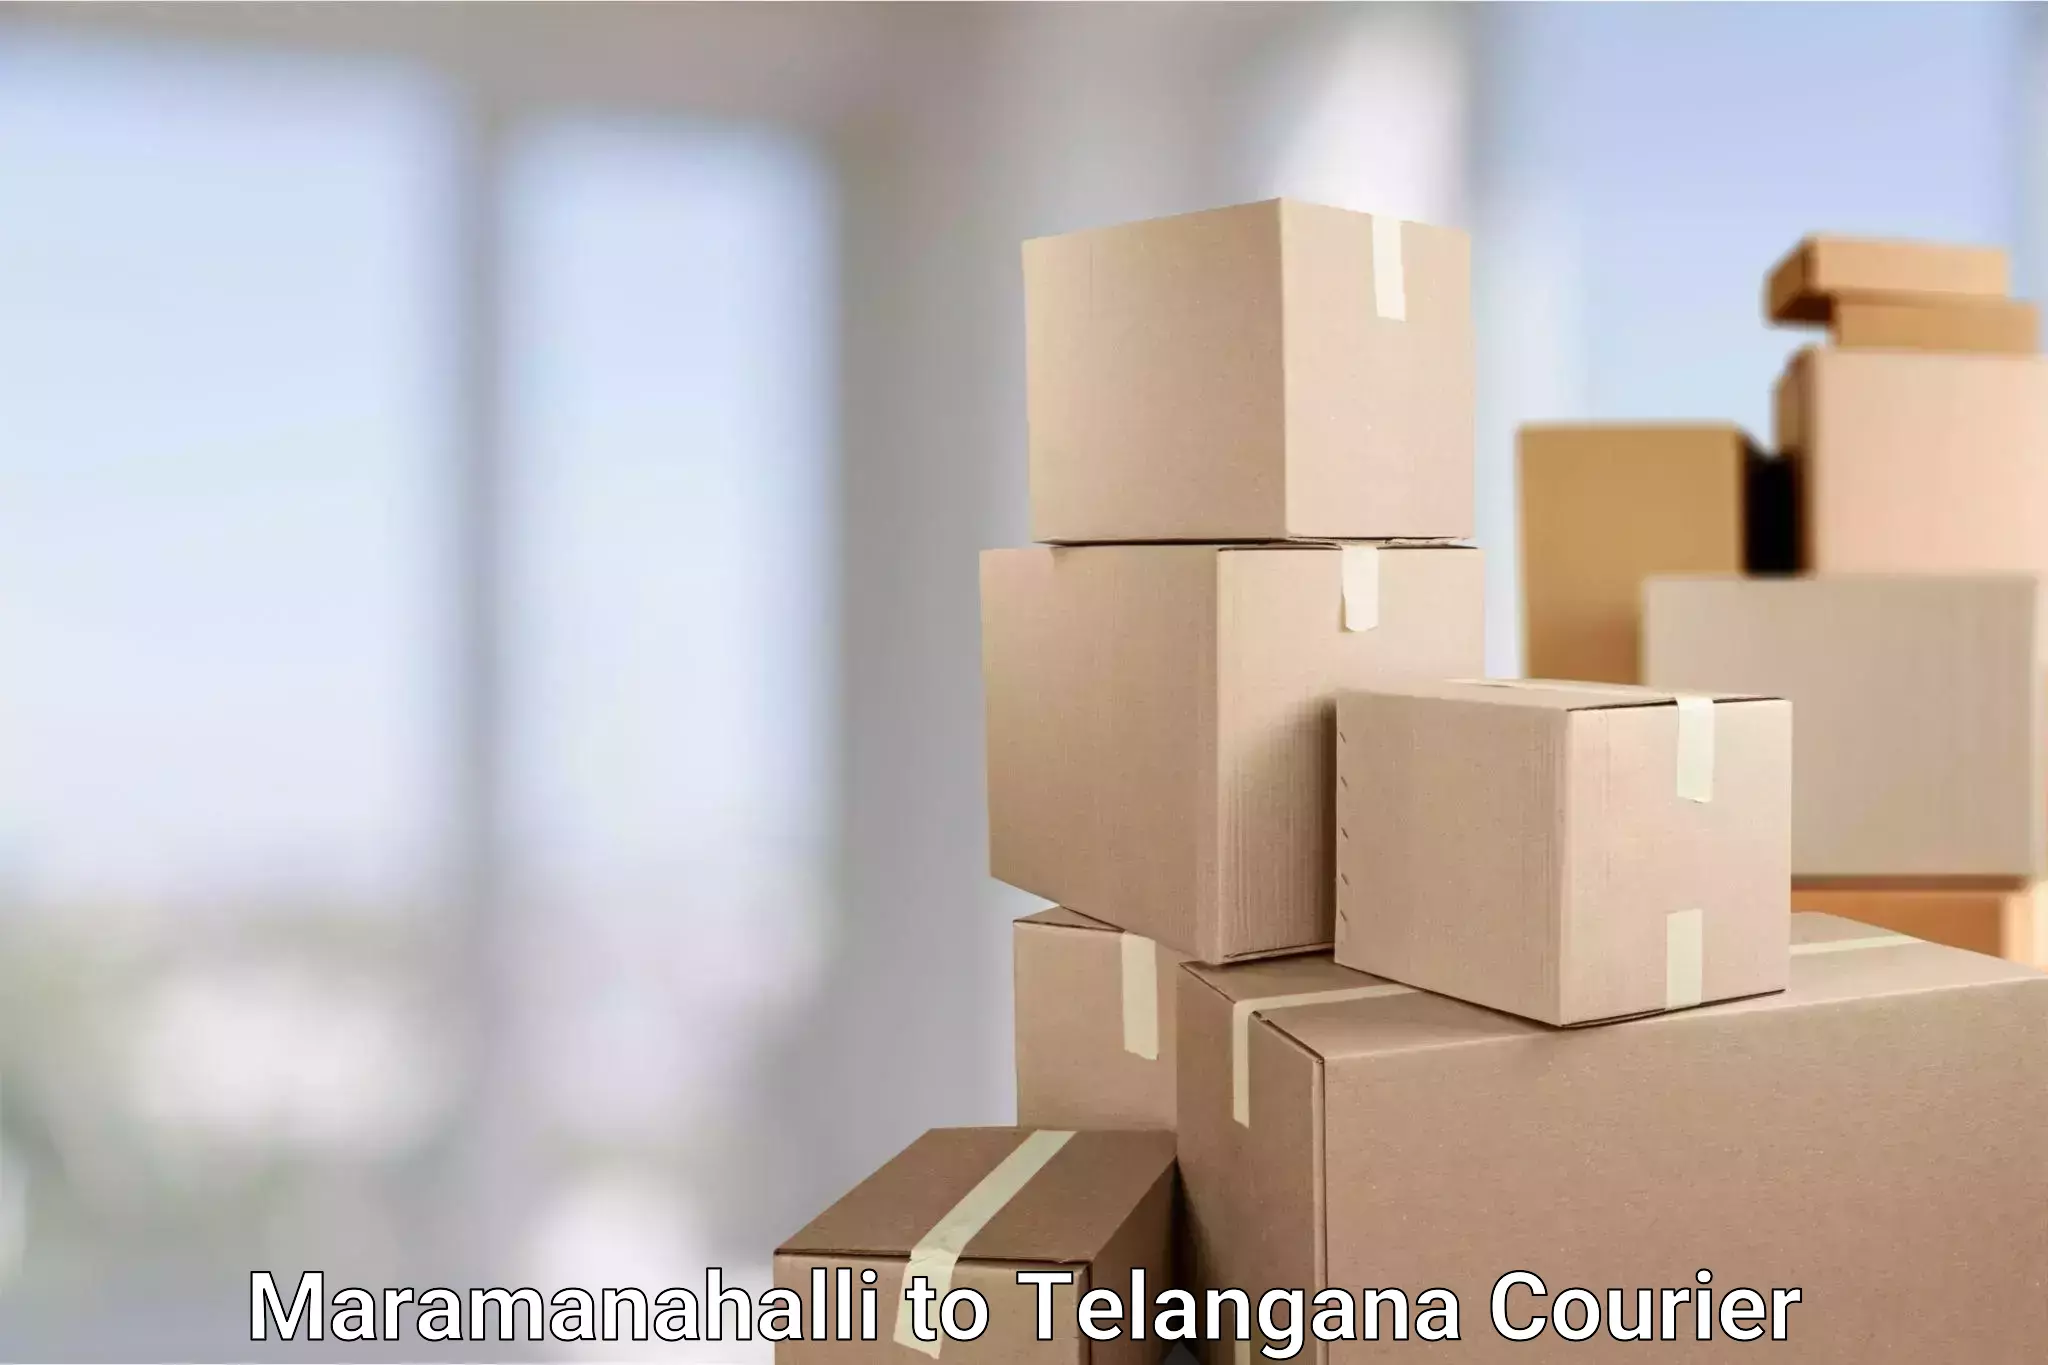 Express courier capabilities in Maramanahalli to Alair